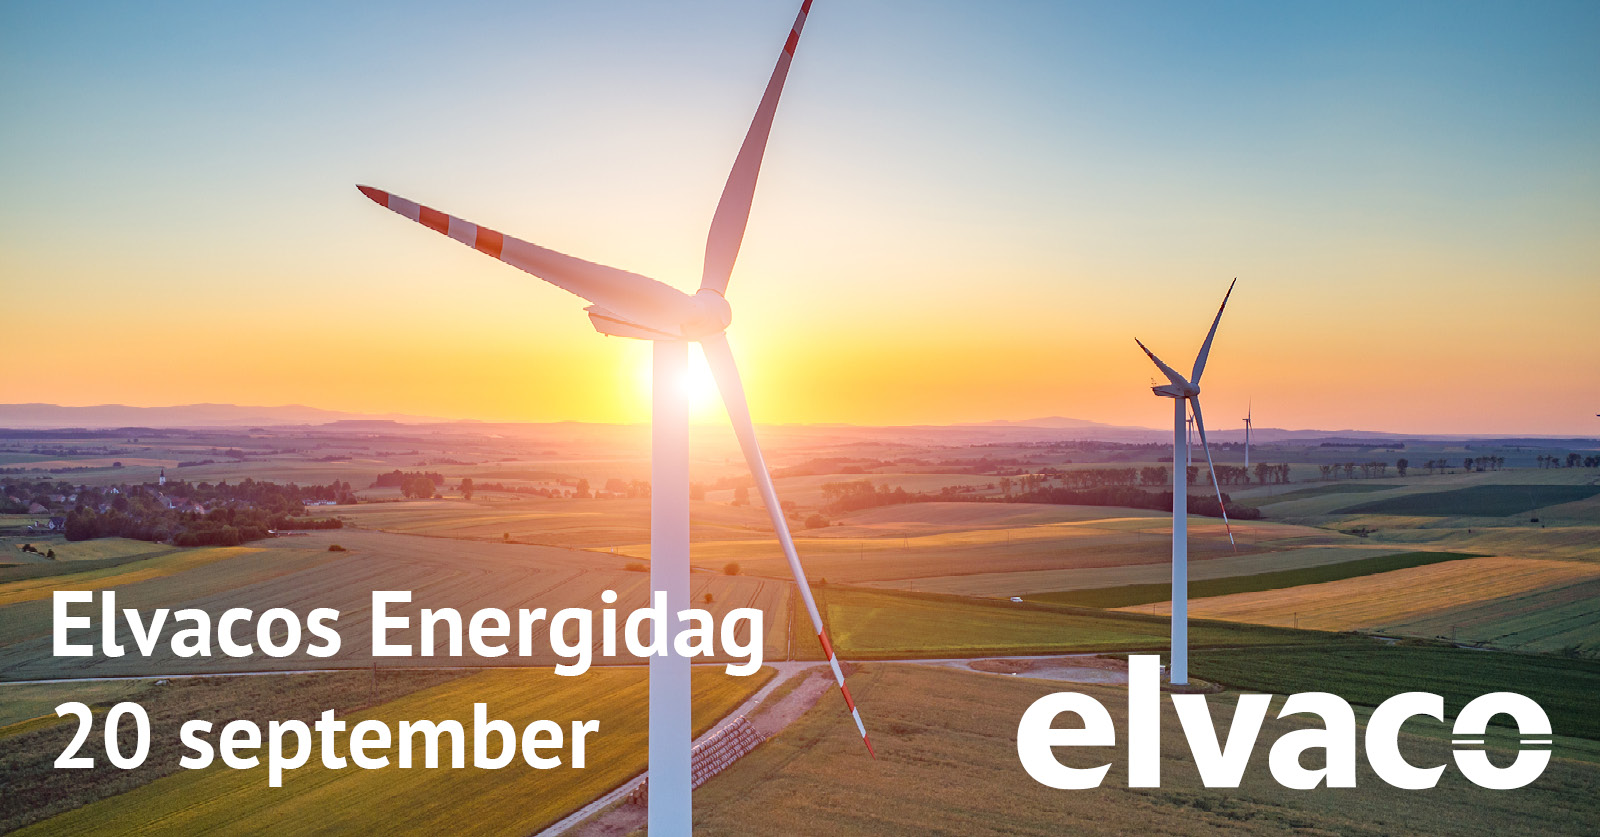 Welcome to Elvaco's Energy day on September 20!